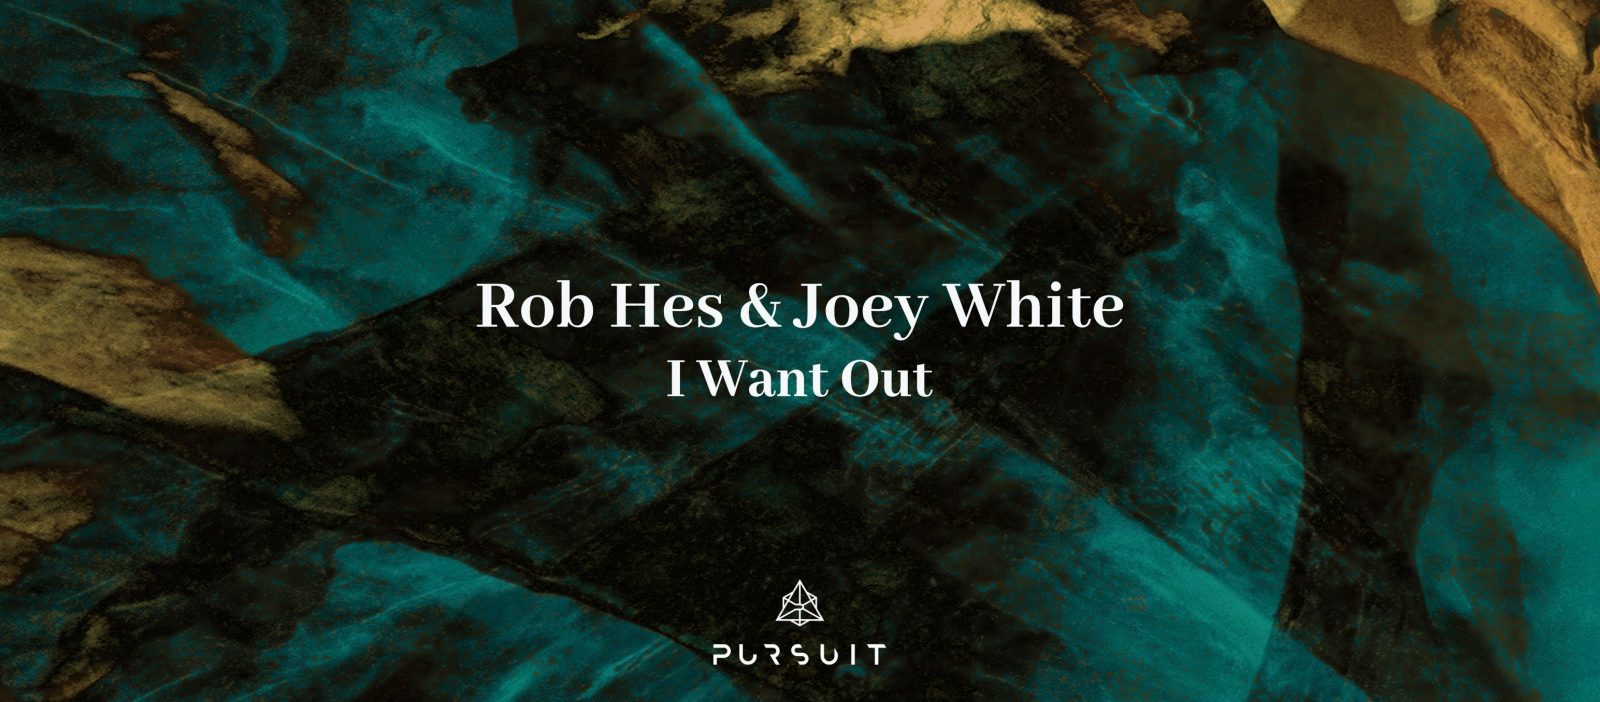 PREMIERE: Rob Hes & Joey White - I Just Want Out [Pursuit Recordings]